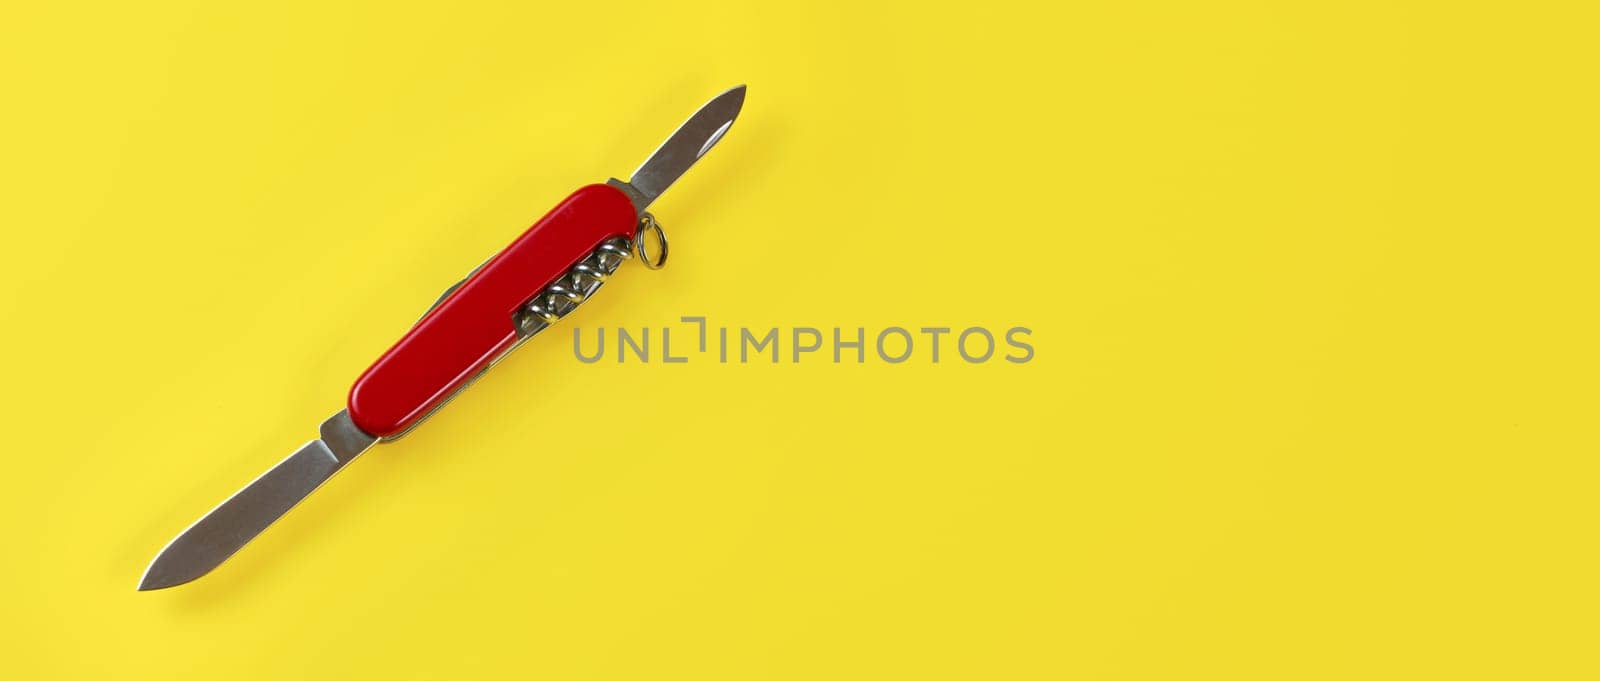 Table top view, red pocket knife with both blades opened, on yellow board. Space for text on right.